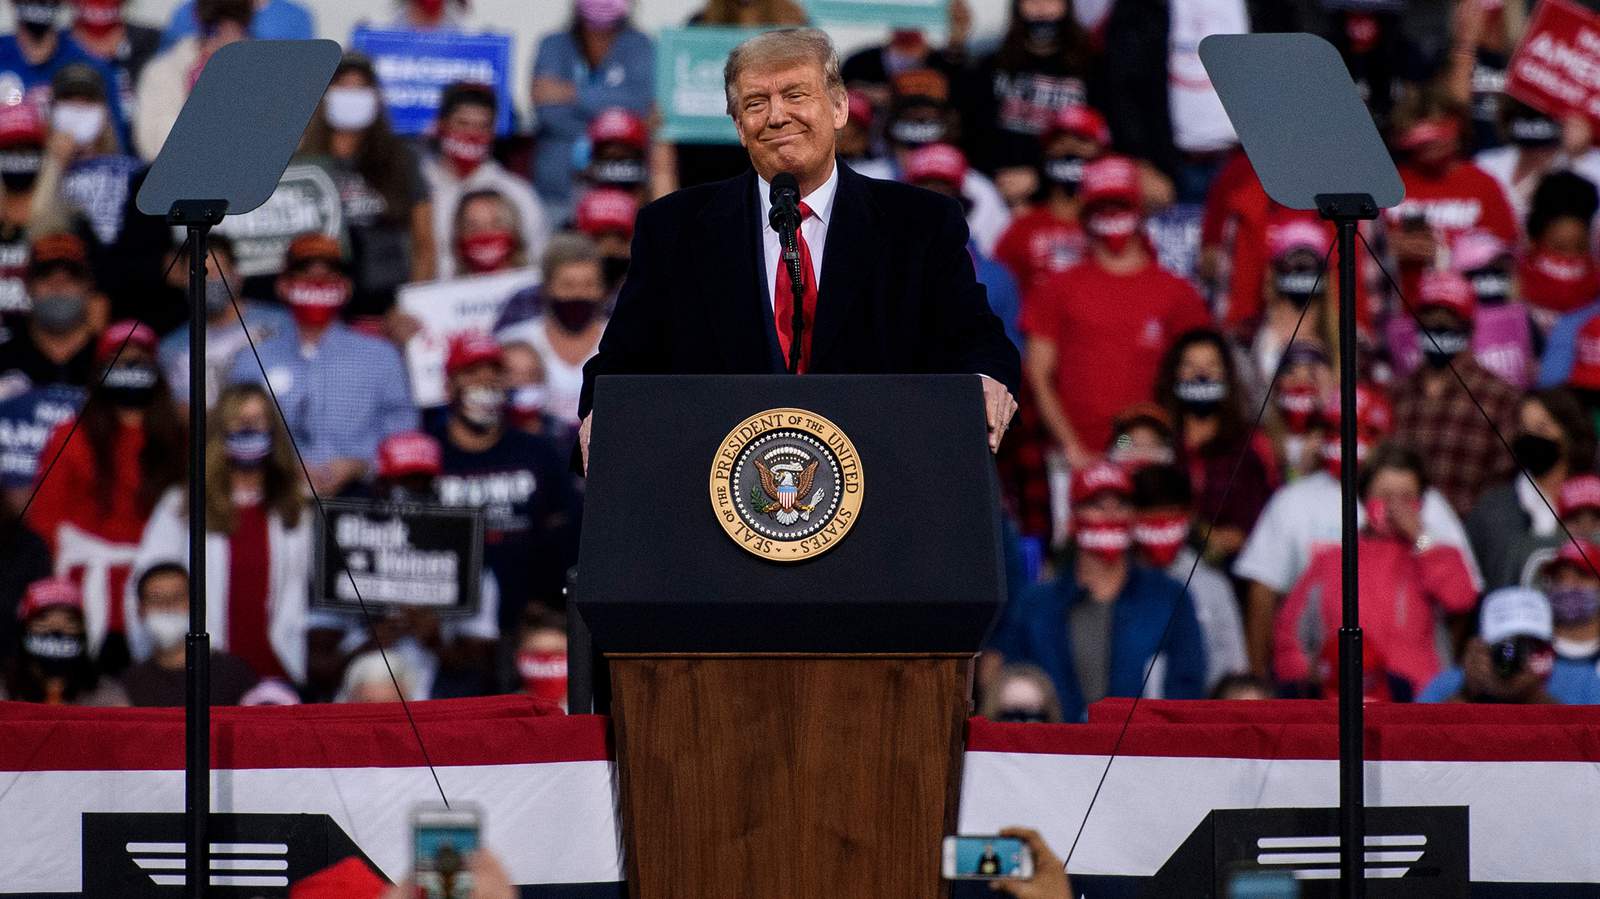 President Trump is having a rally in Virginia this Friday